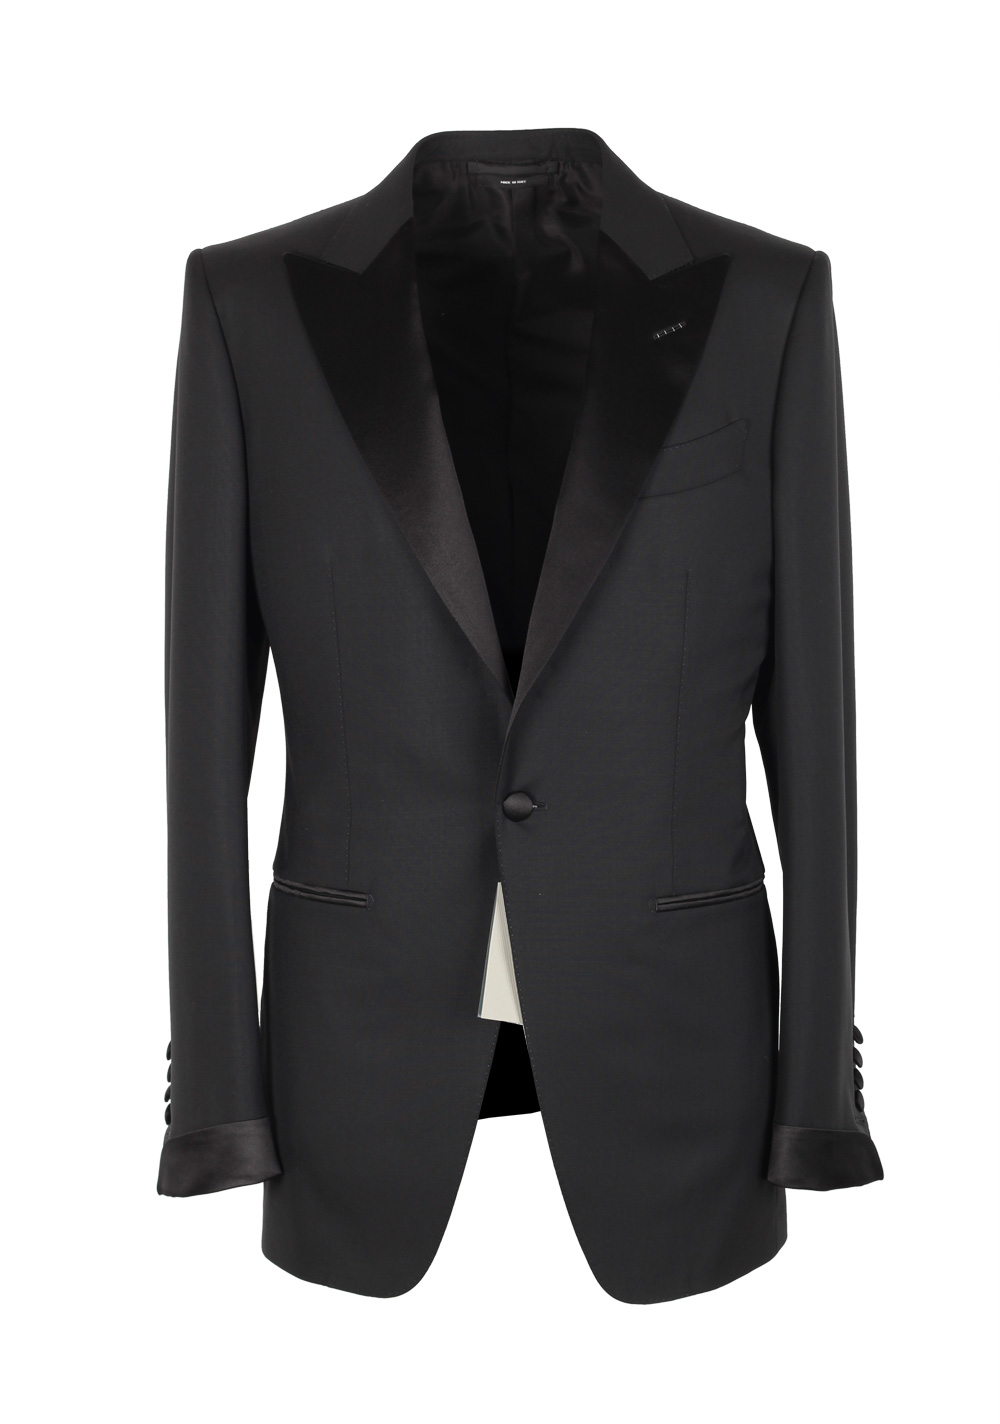 TOM FORD O’Connor Black Tuxedo Smoking Suit Size 52C / 42S U.S. Fit Y ...